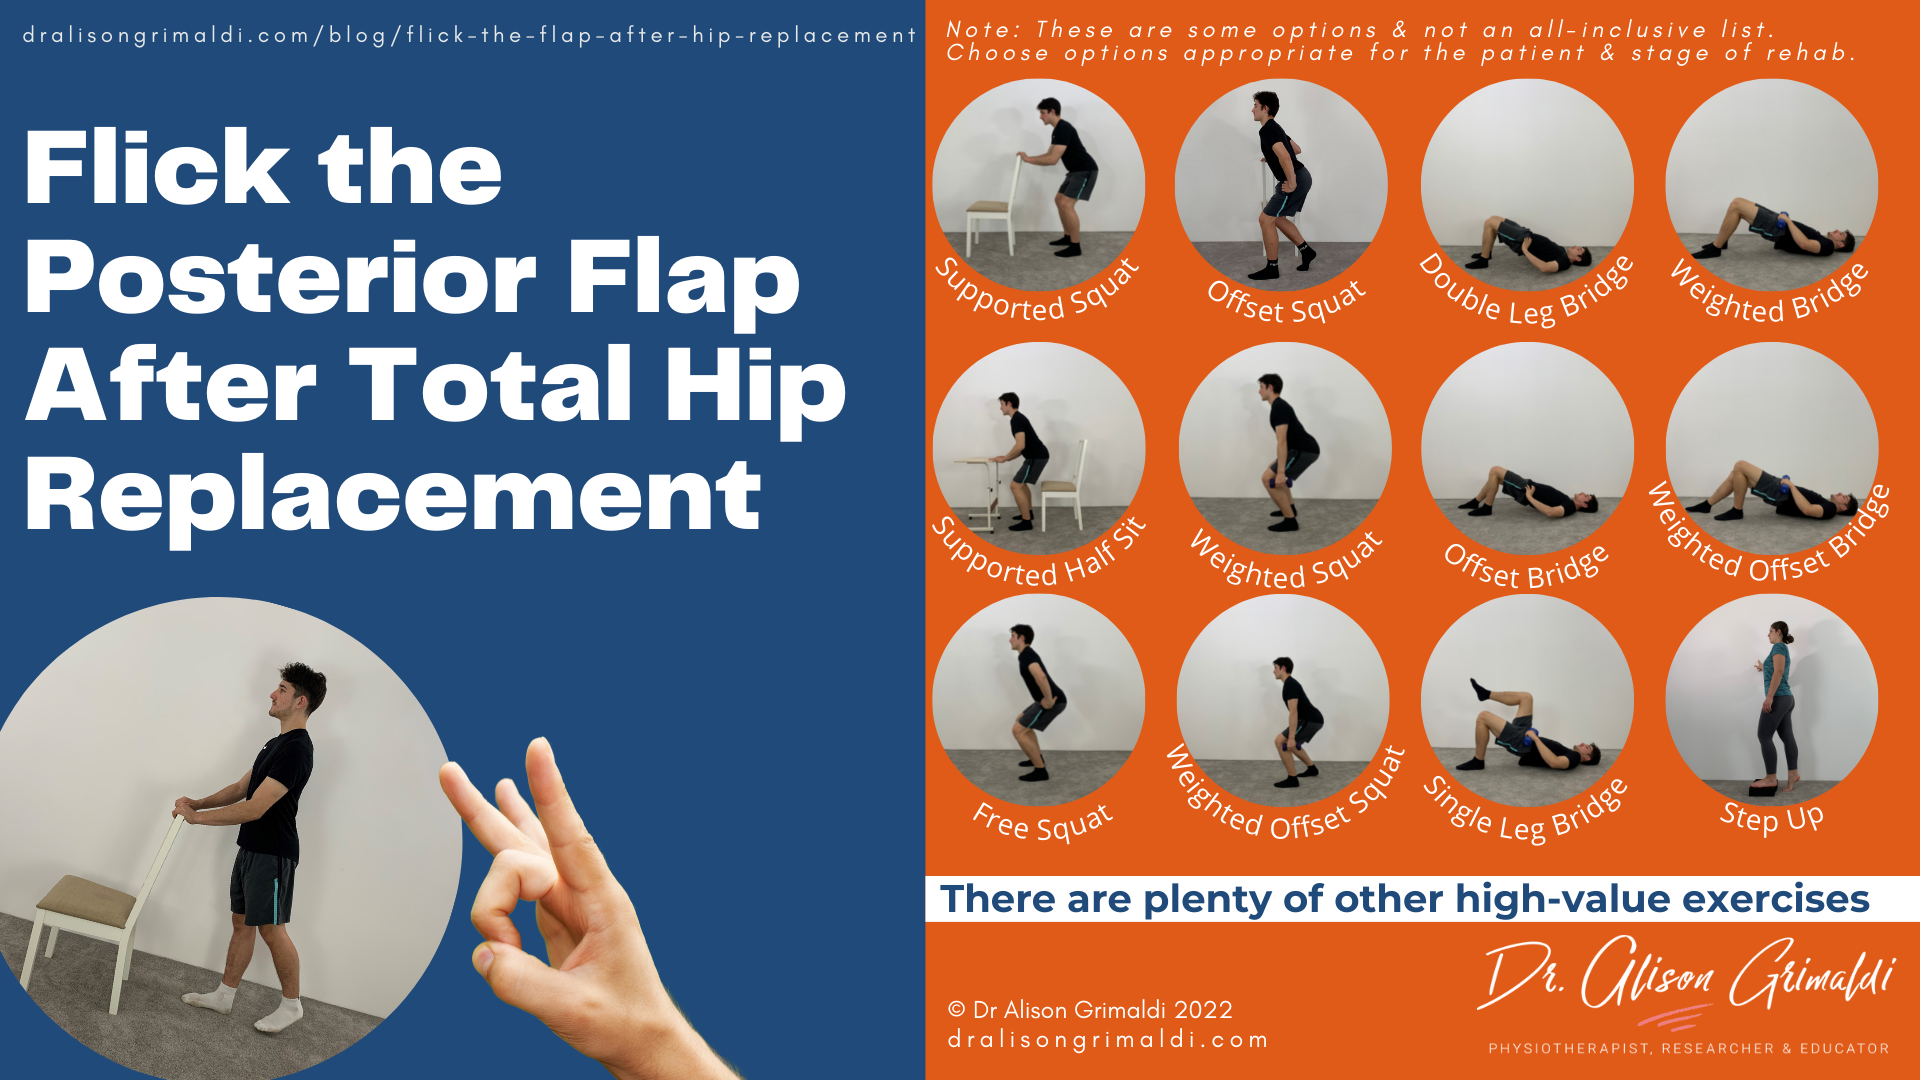 Flick the Posterior Flap After Total Hip Replacement